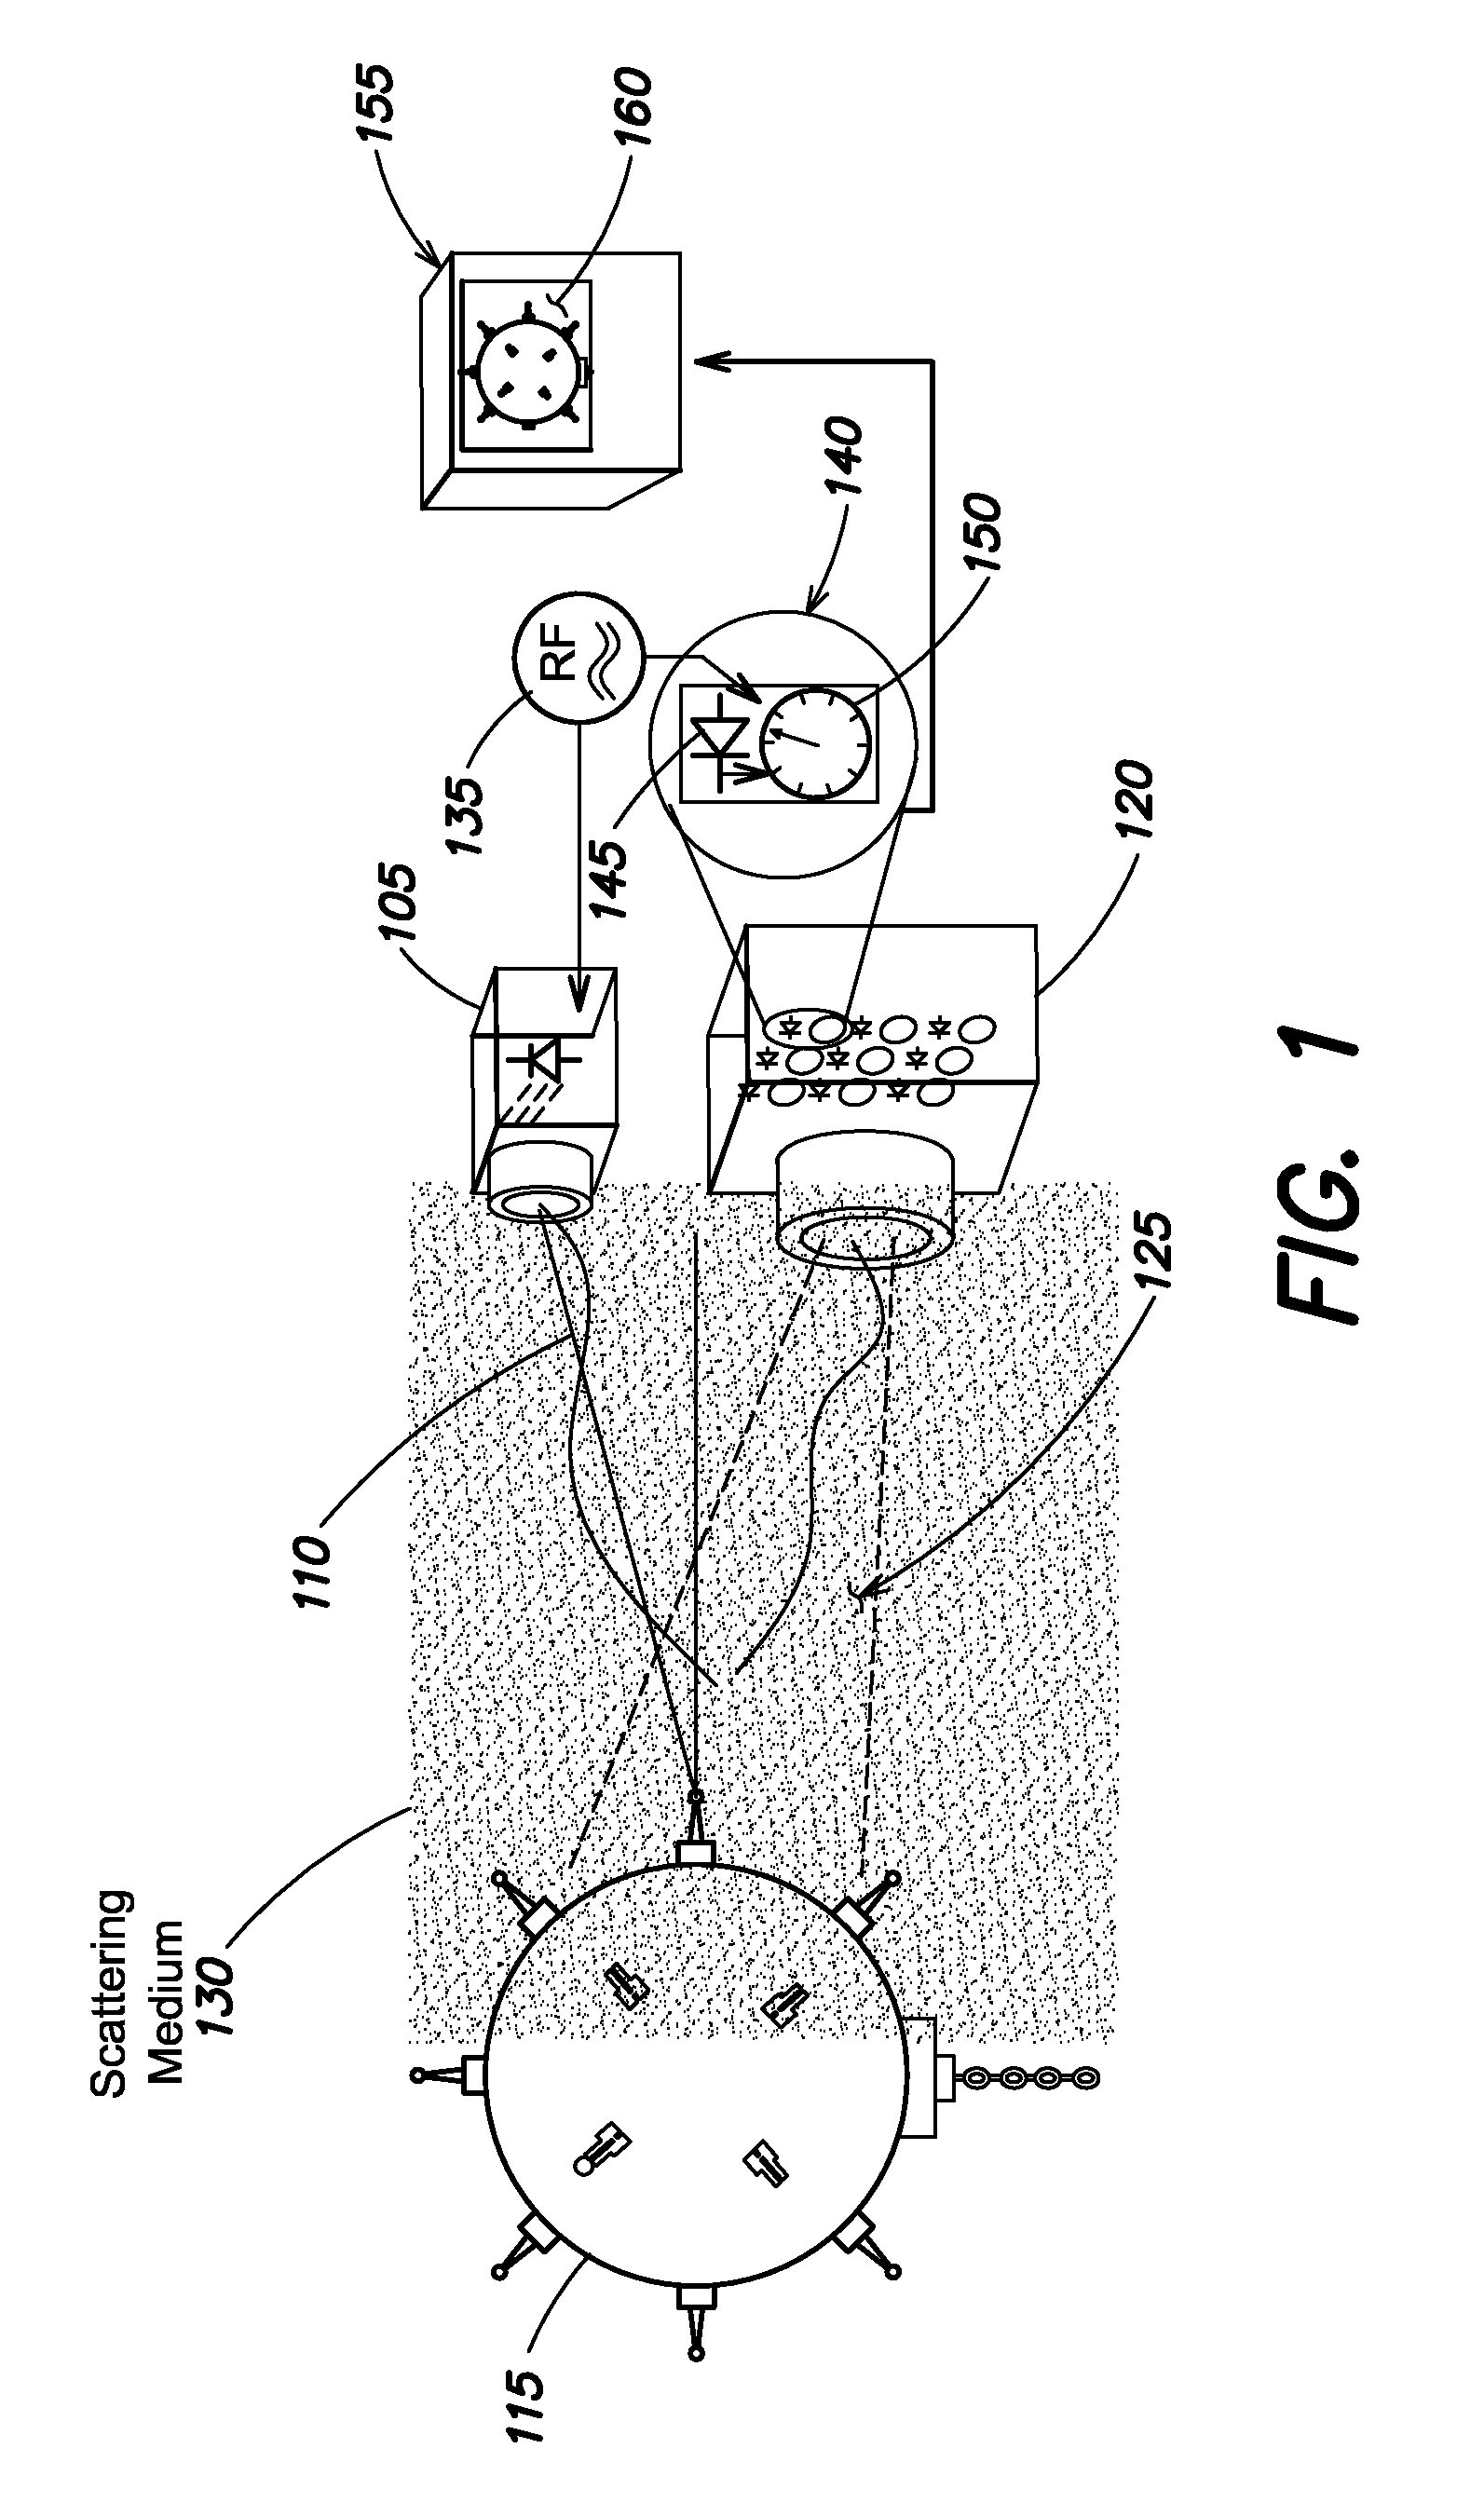 Methods and apparatus for imaging in scattering environments